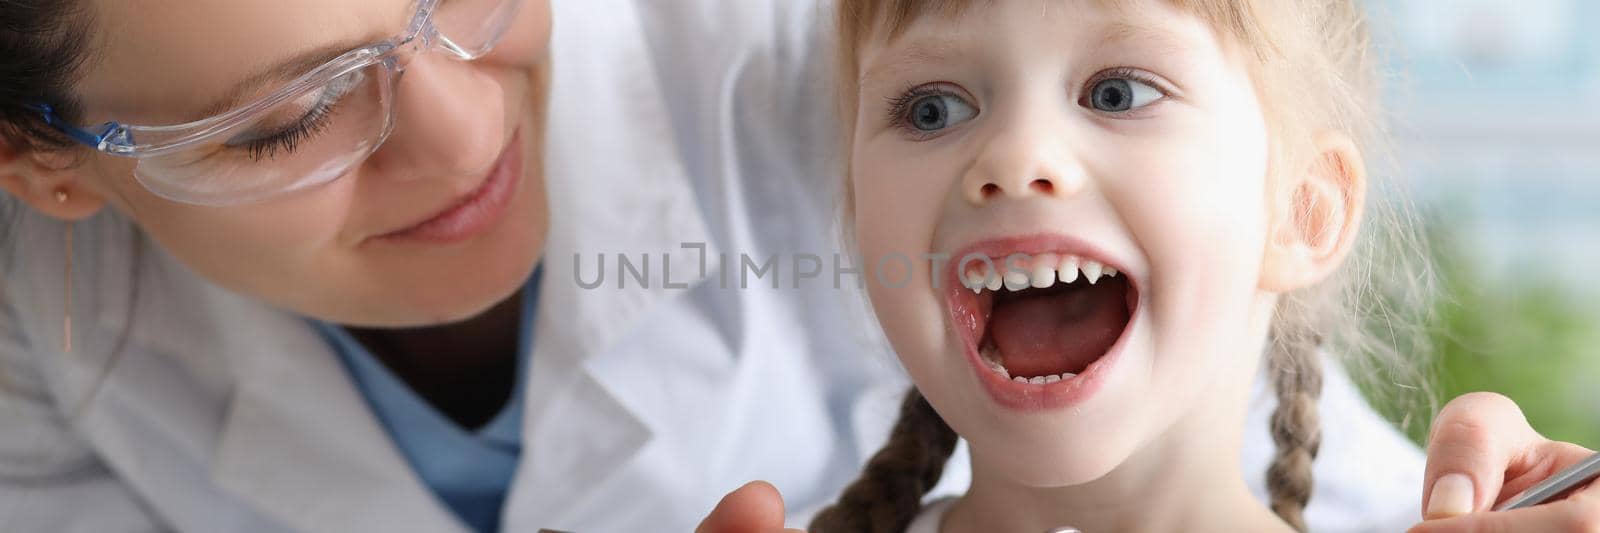 Portrait of child visiting family doctor, pediatrician with tool check throat, girl open mouth wide. Healthcare, child care, medicine, childhood concept